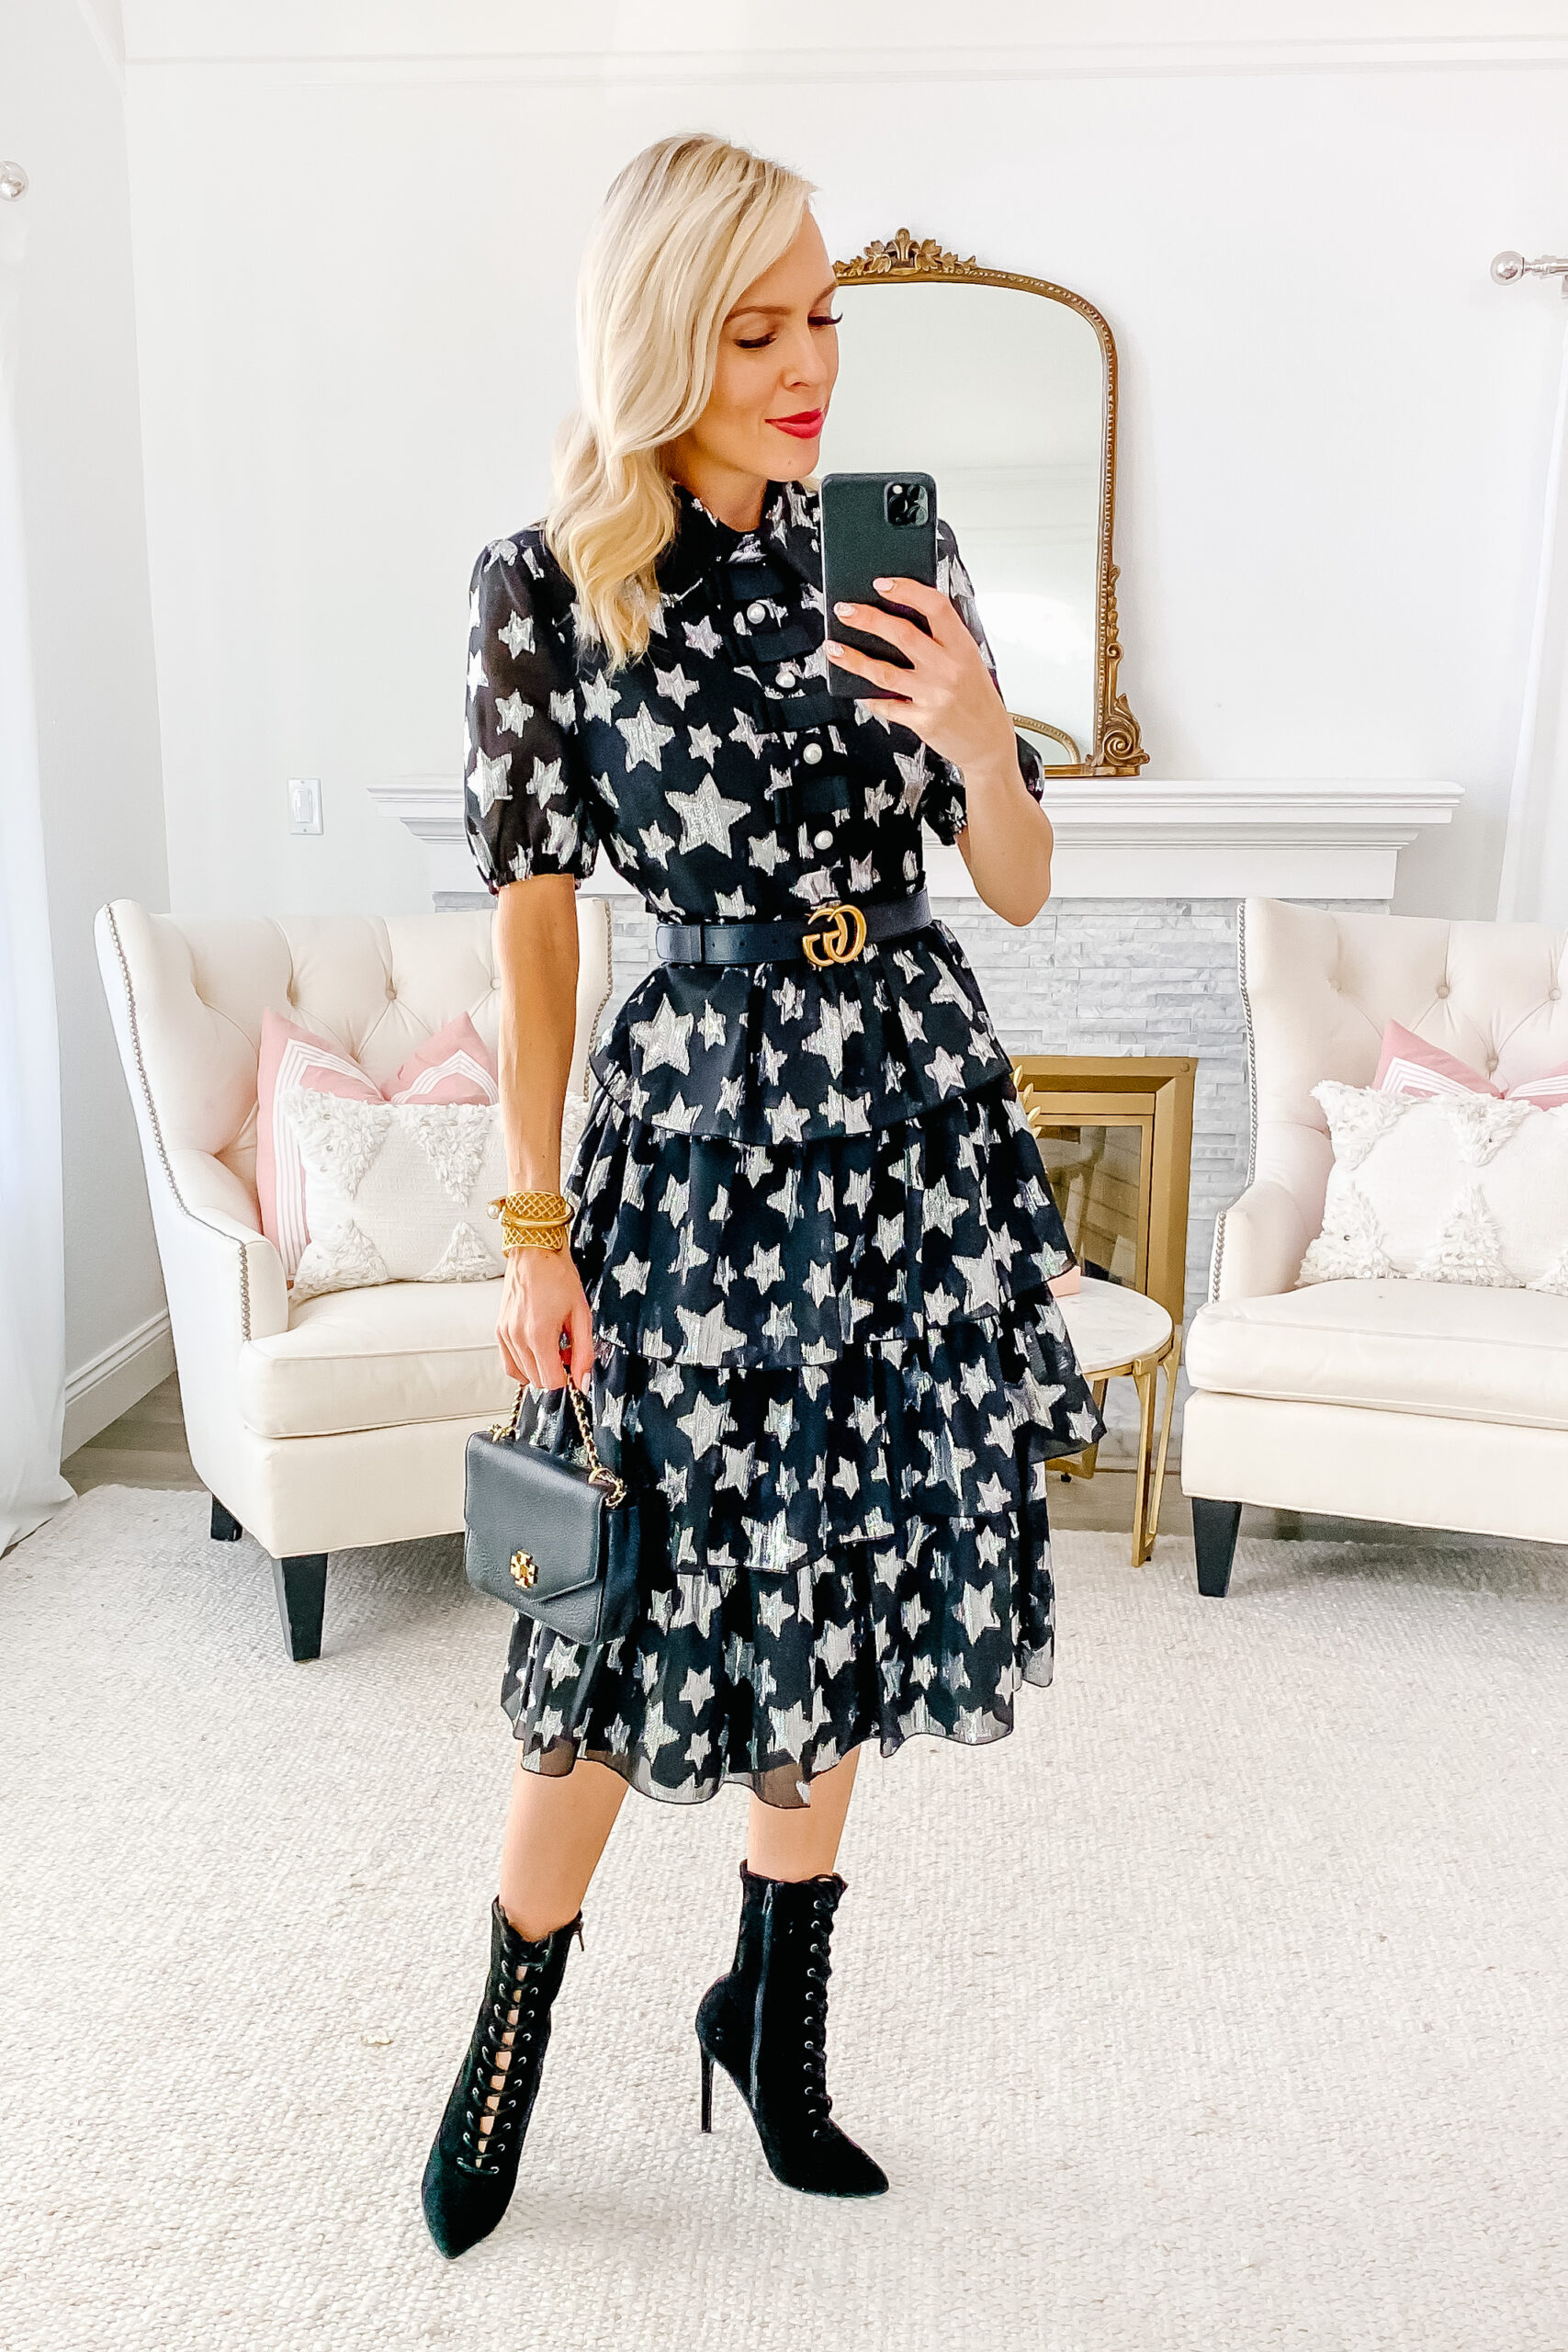 5 ways to style a holiday dress, by top San Francisco fashion blogger Lombard and Fifth.